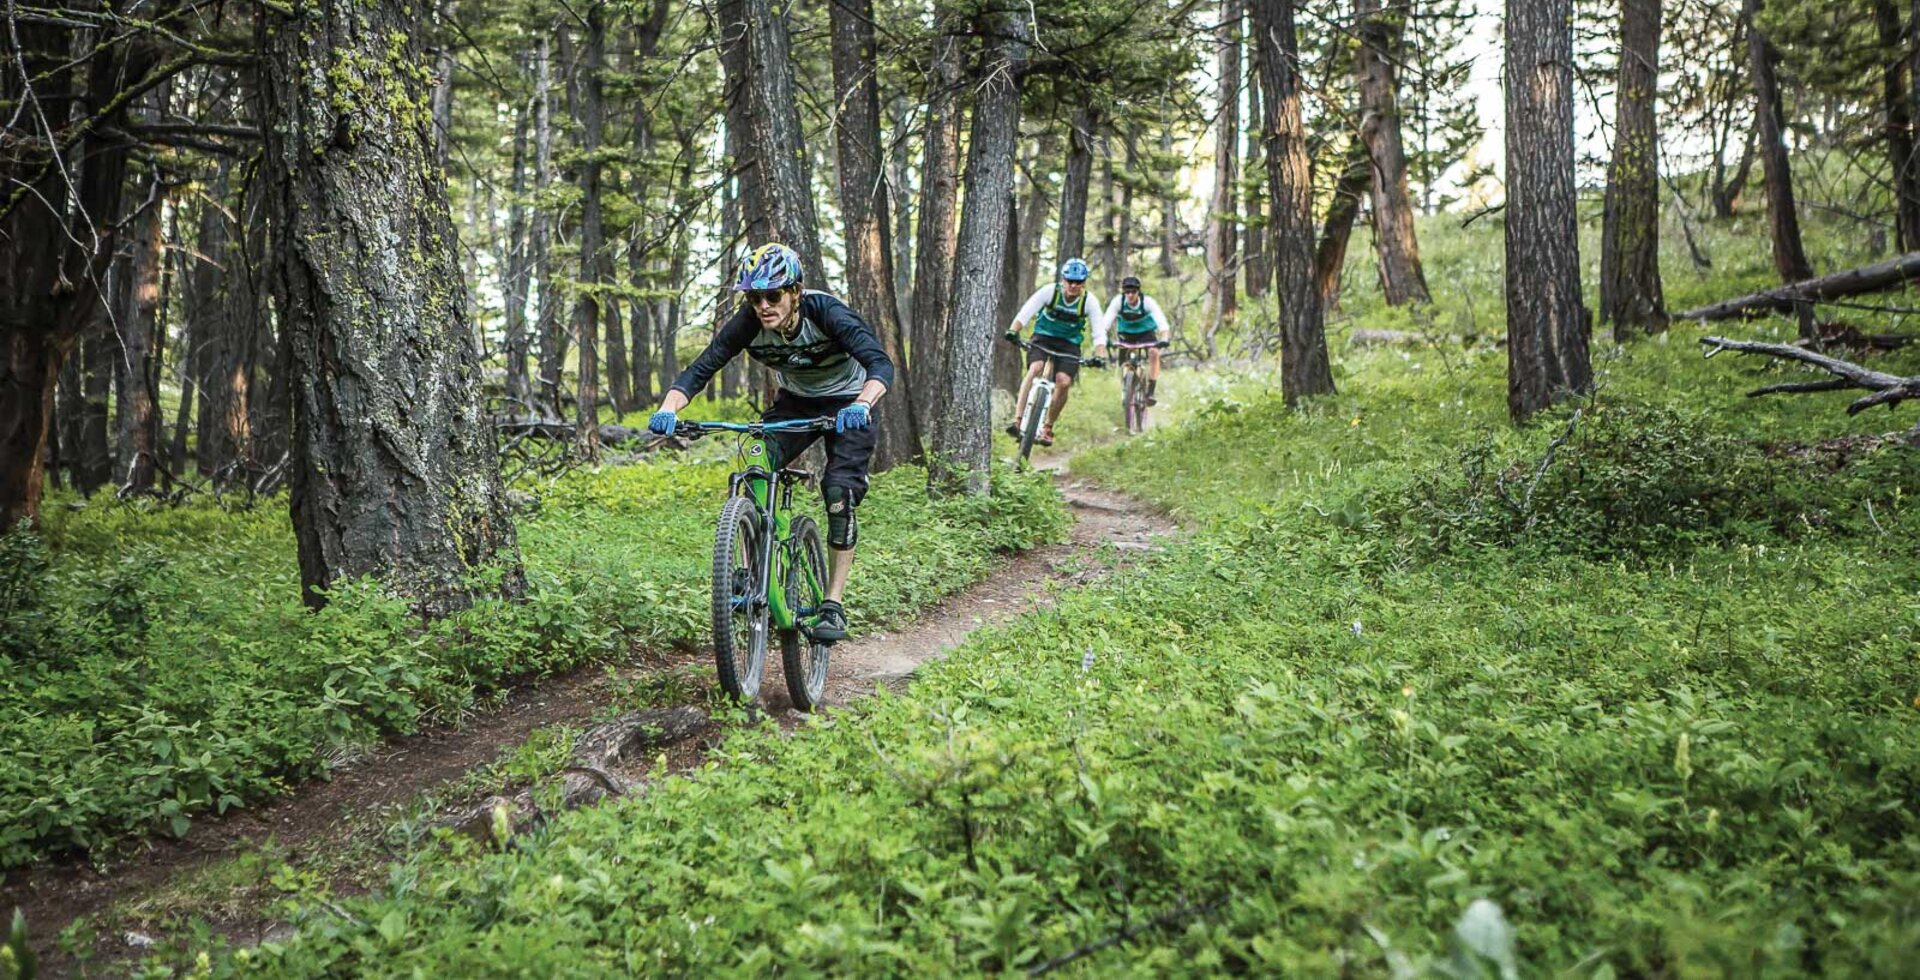 After conquering the climb on the Mount helena Ridge Trail, Keenan Cox, Dan Barry and Brian Elliott drop into a mellow flowy descent through the pines. Keep your eyes up, though; a few steep and loose sections await farther down. CANON 1/1000 sec, f/3.2, ISO 1600